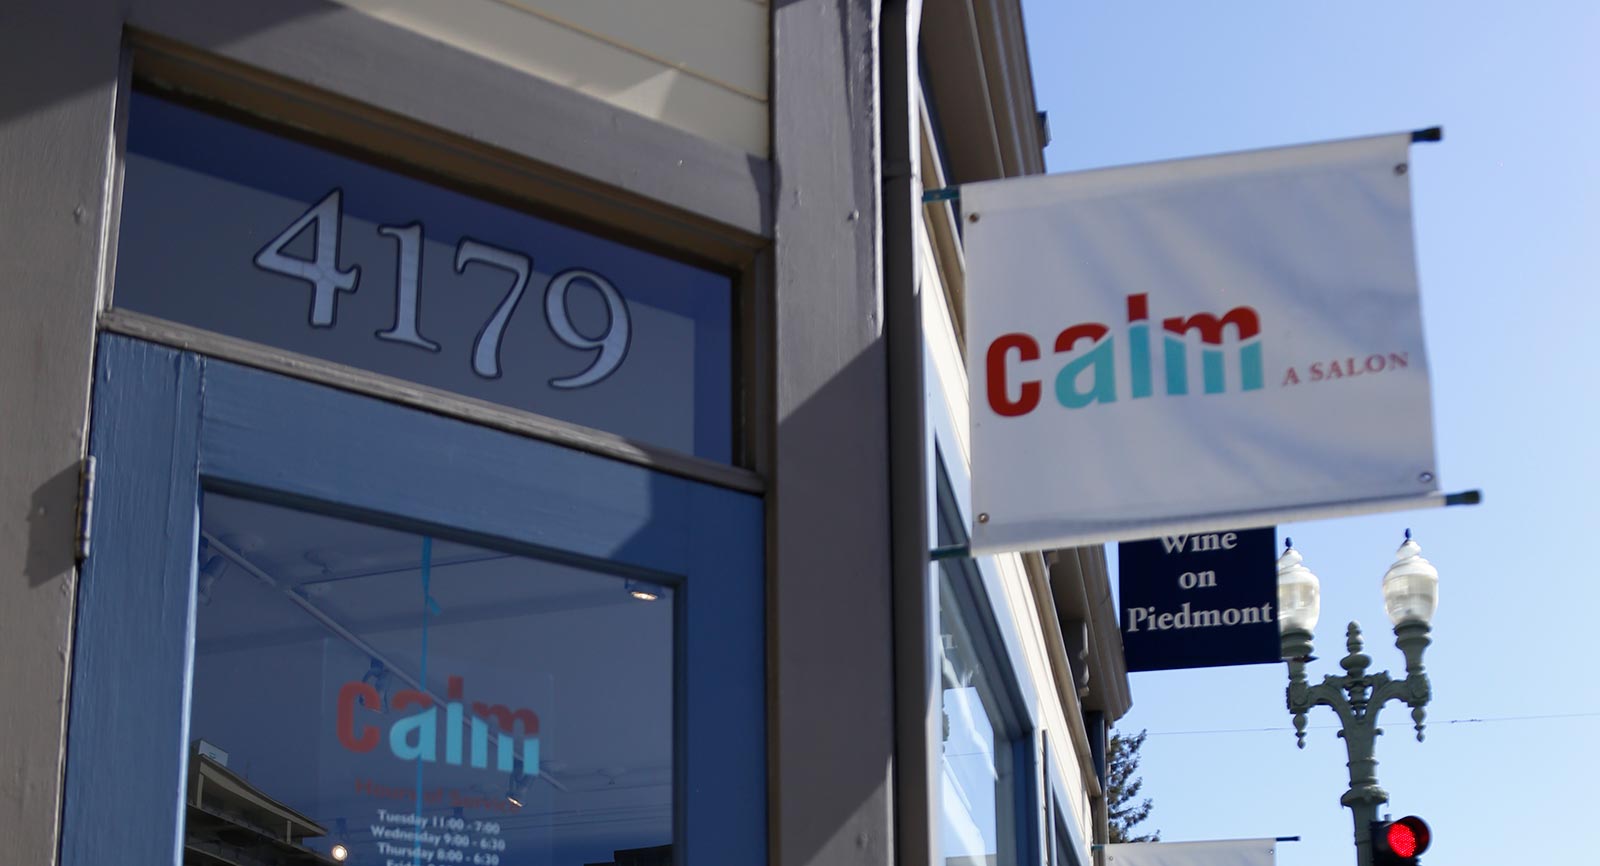 Calm, a Salon - front door and sign/shingle